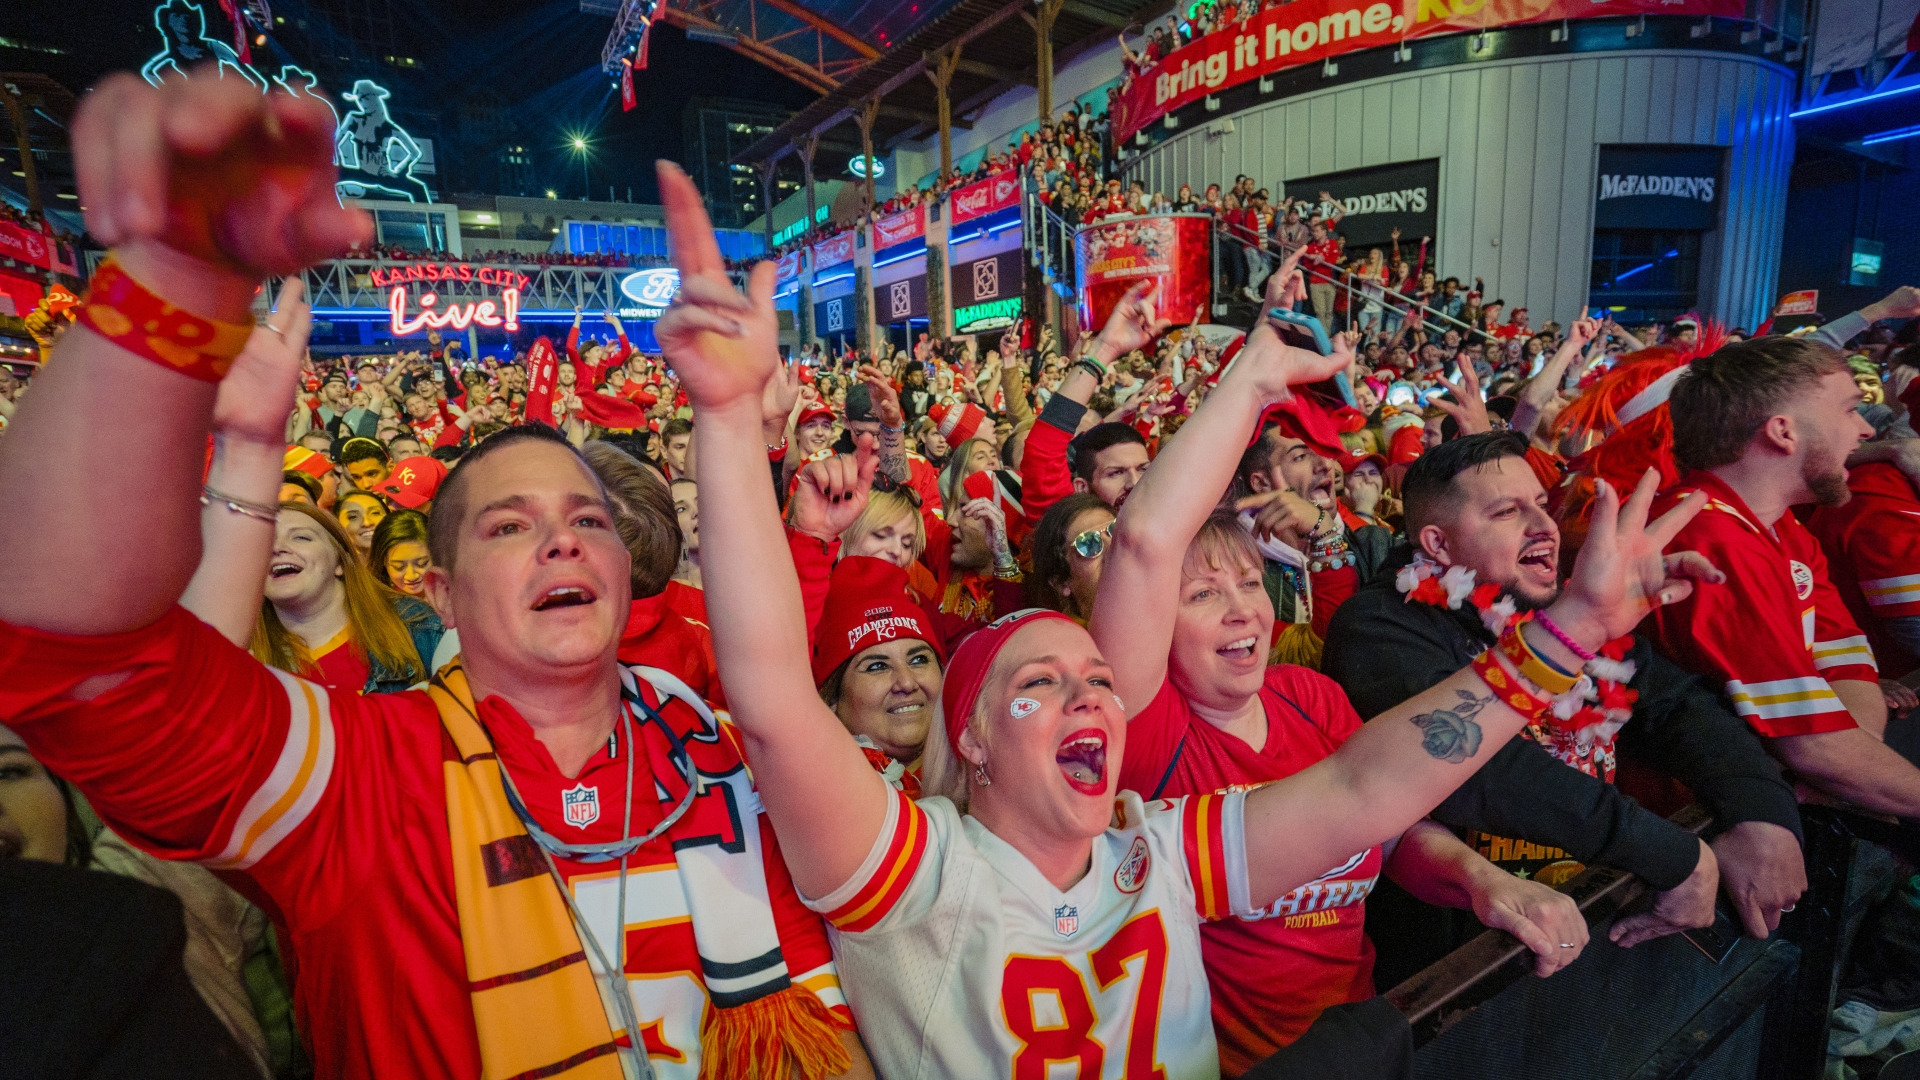 Celebrating the Kansas City Chiefs, the Chop Divides - The New York Times